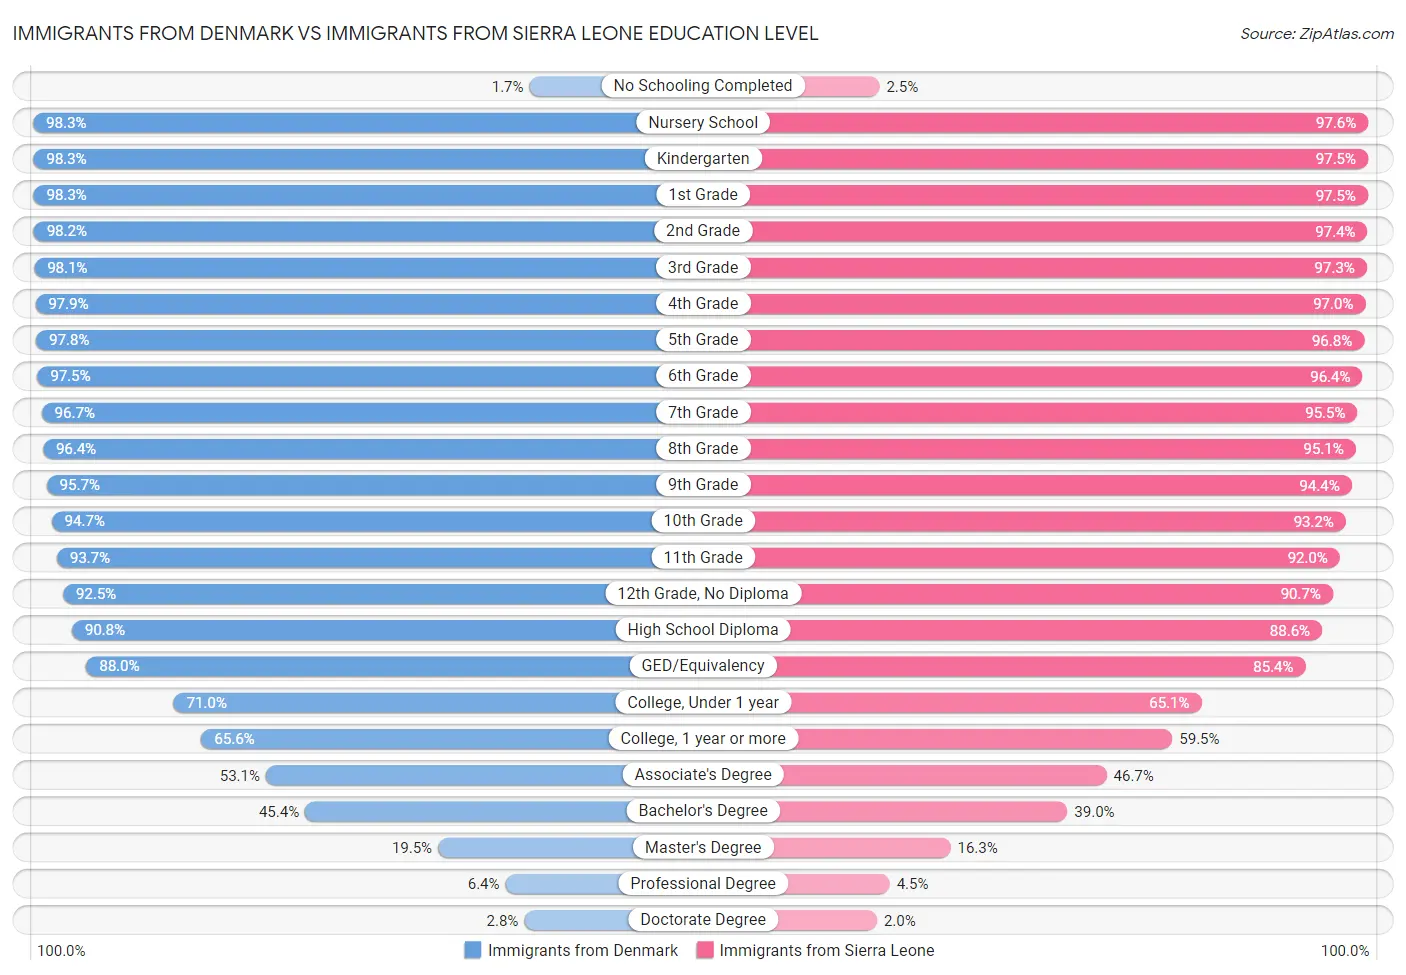 Immigrants from Denmark vs Immigrants from Sierra Leone Education Level